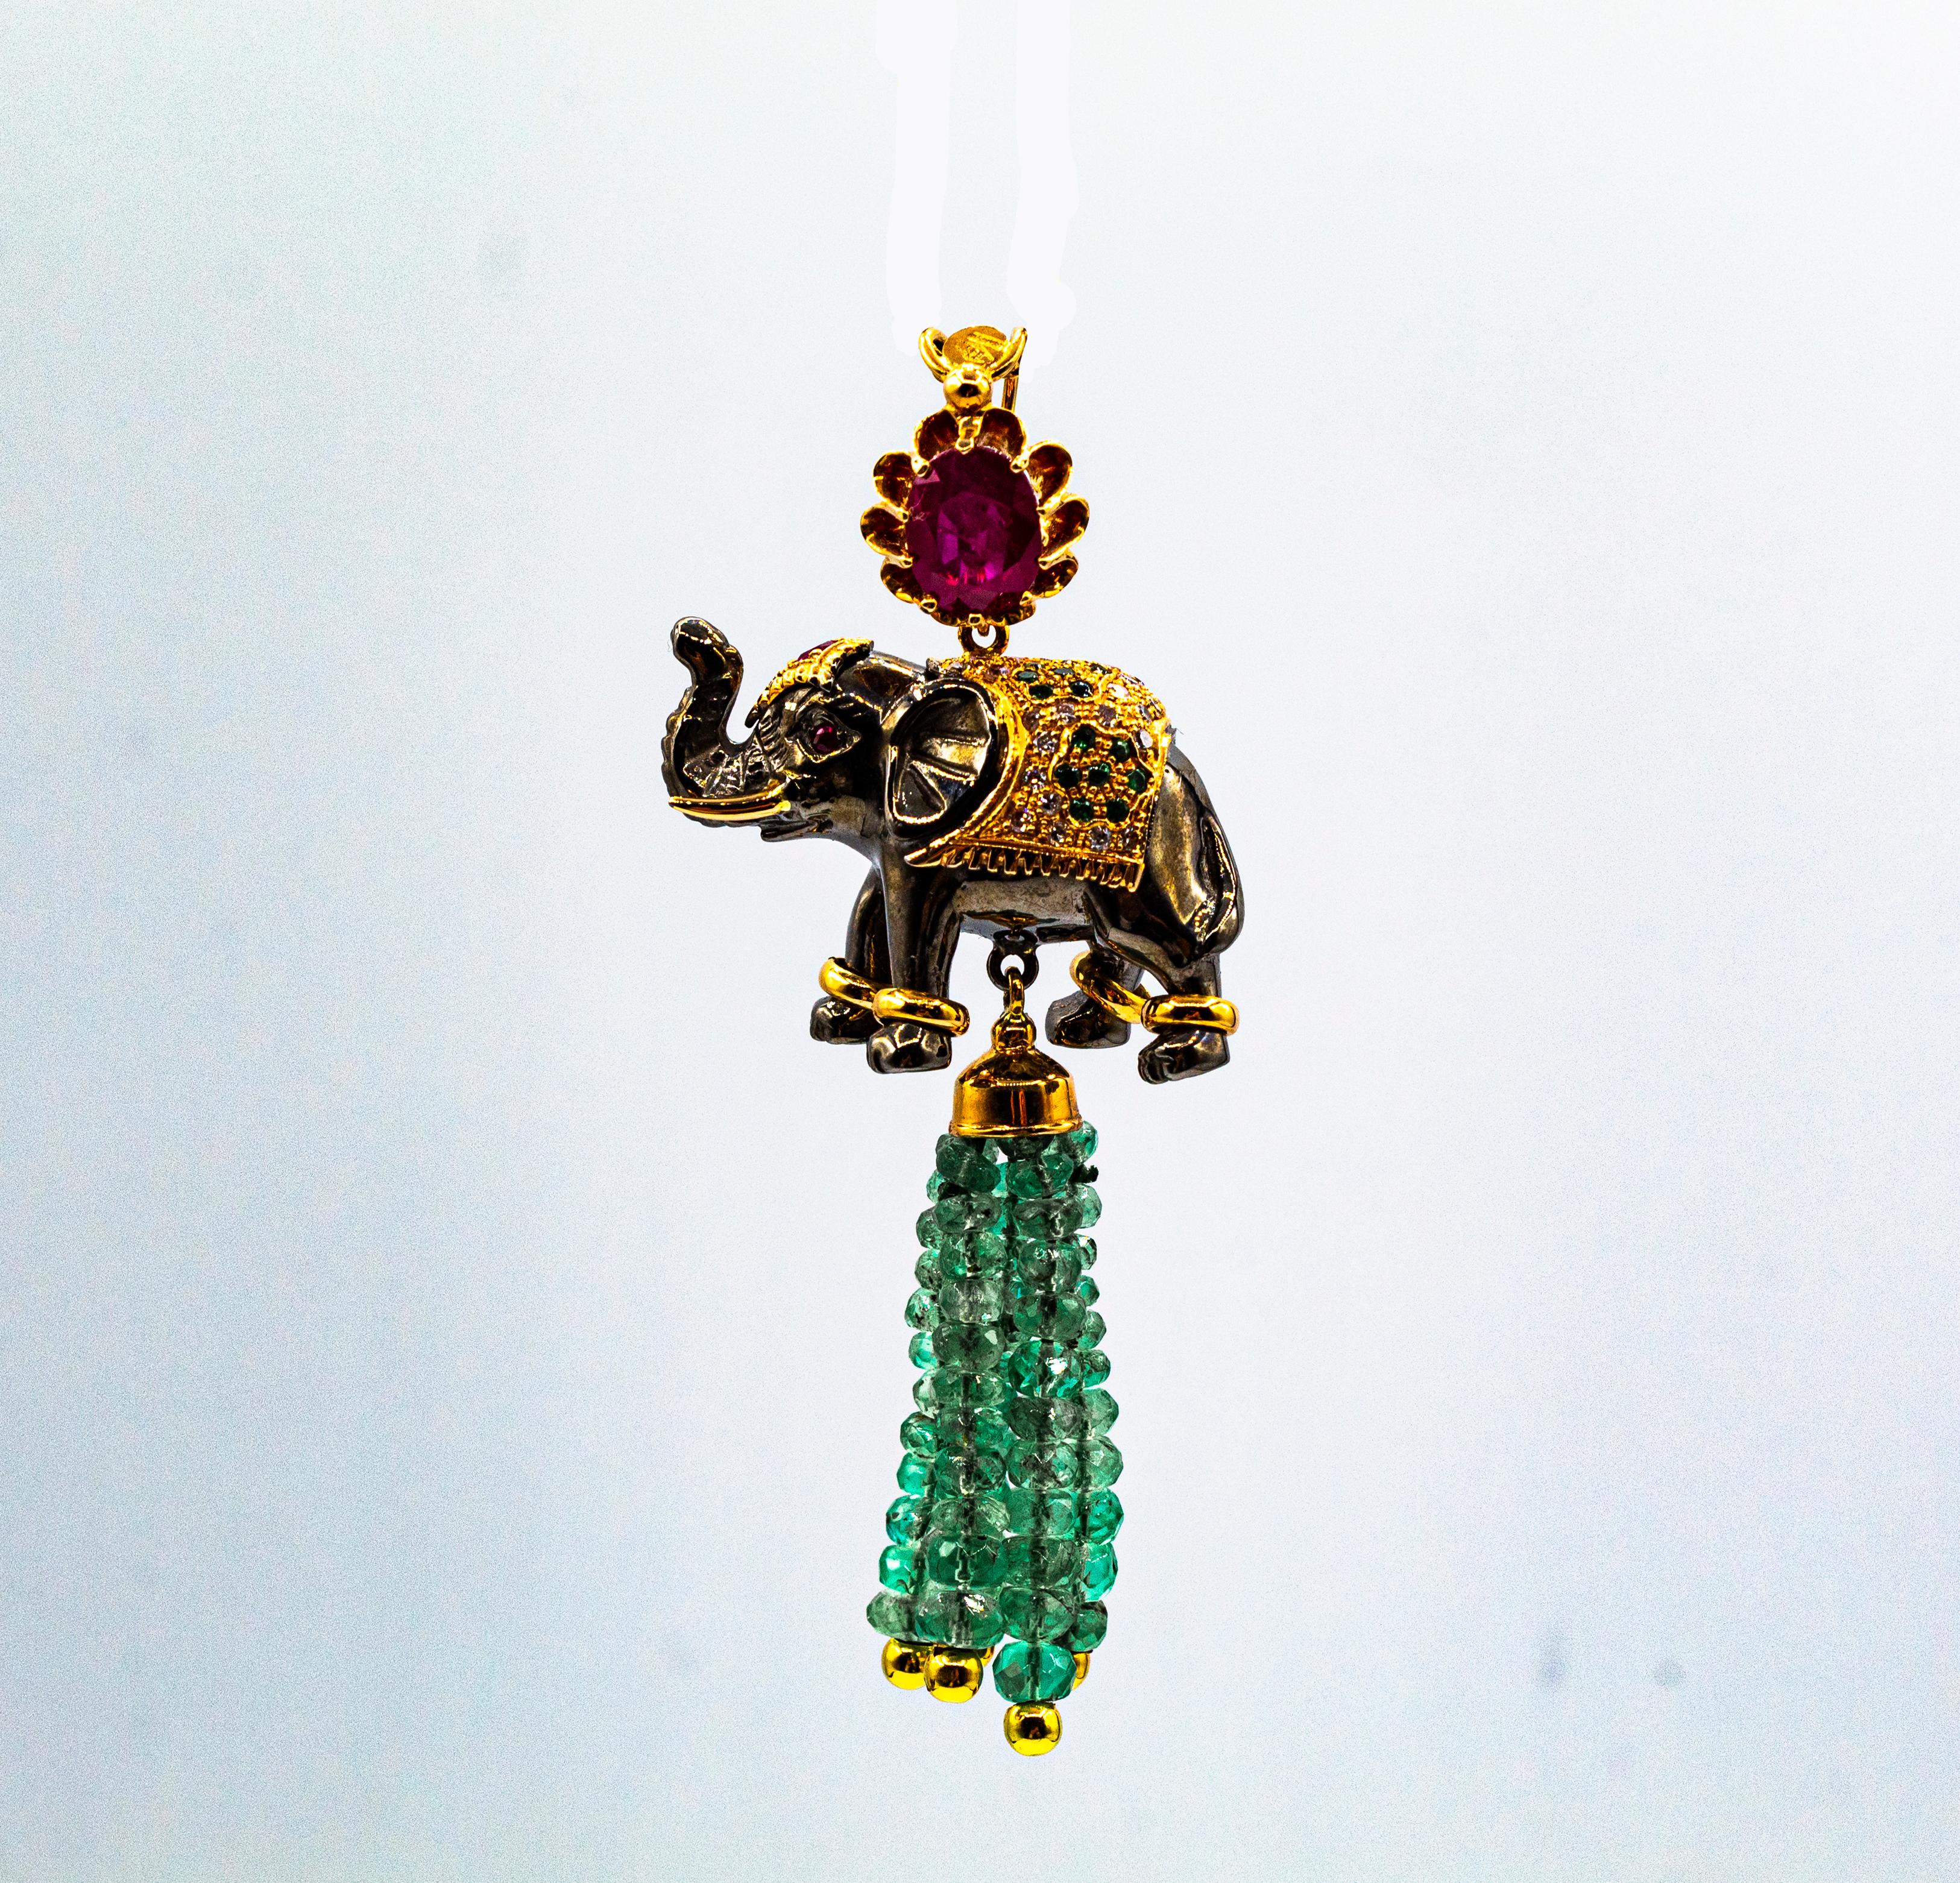 For any problems related to some materials contained in the items that do not allow shipping, please contact the seller with a private message to solve the problem.
We can ship every piece of our 1stdibs catalog worldwide.

This Elephant Pendant is